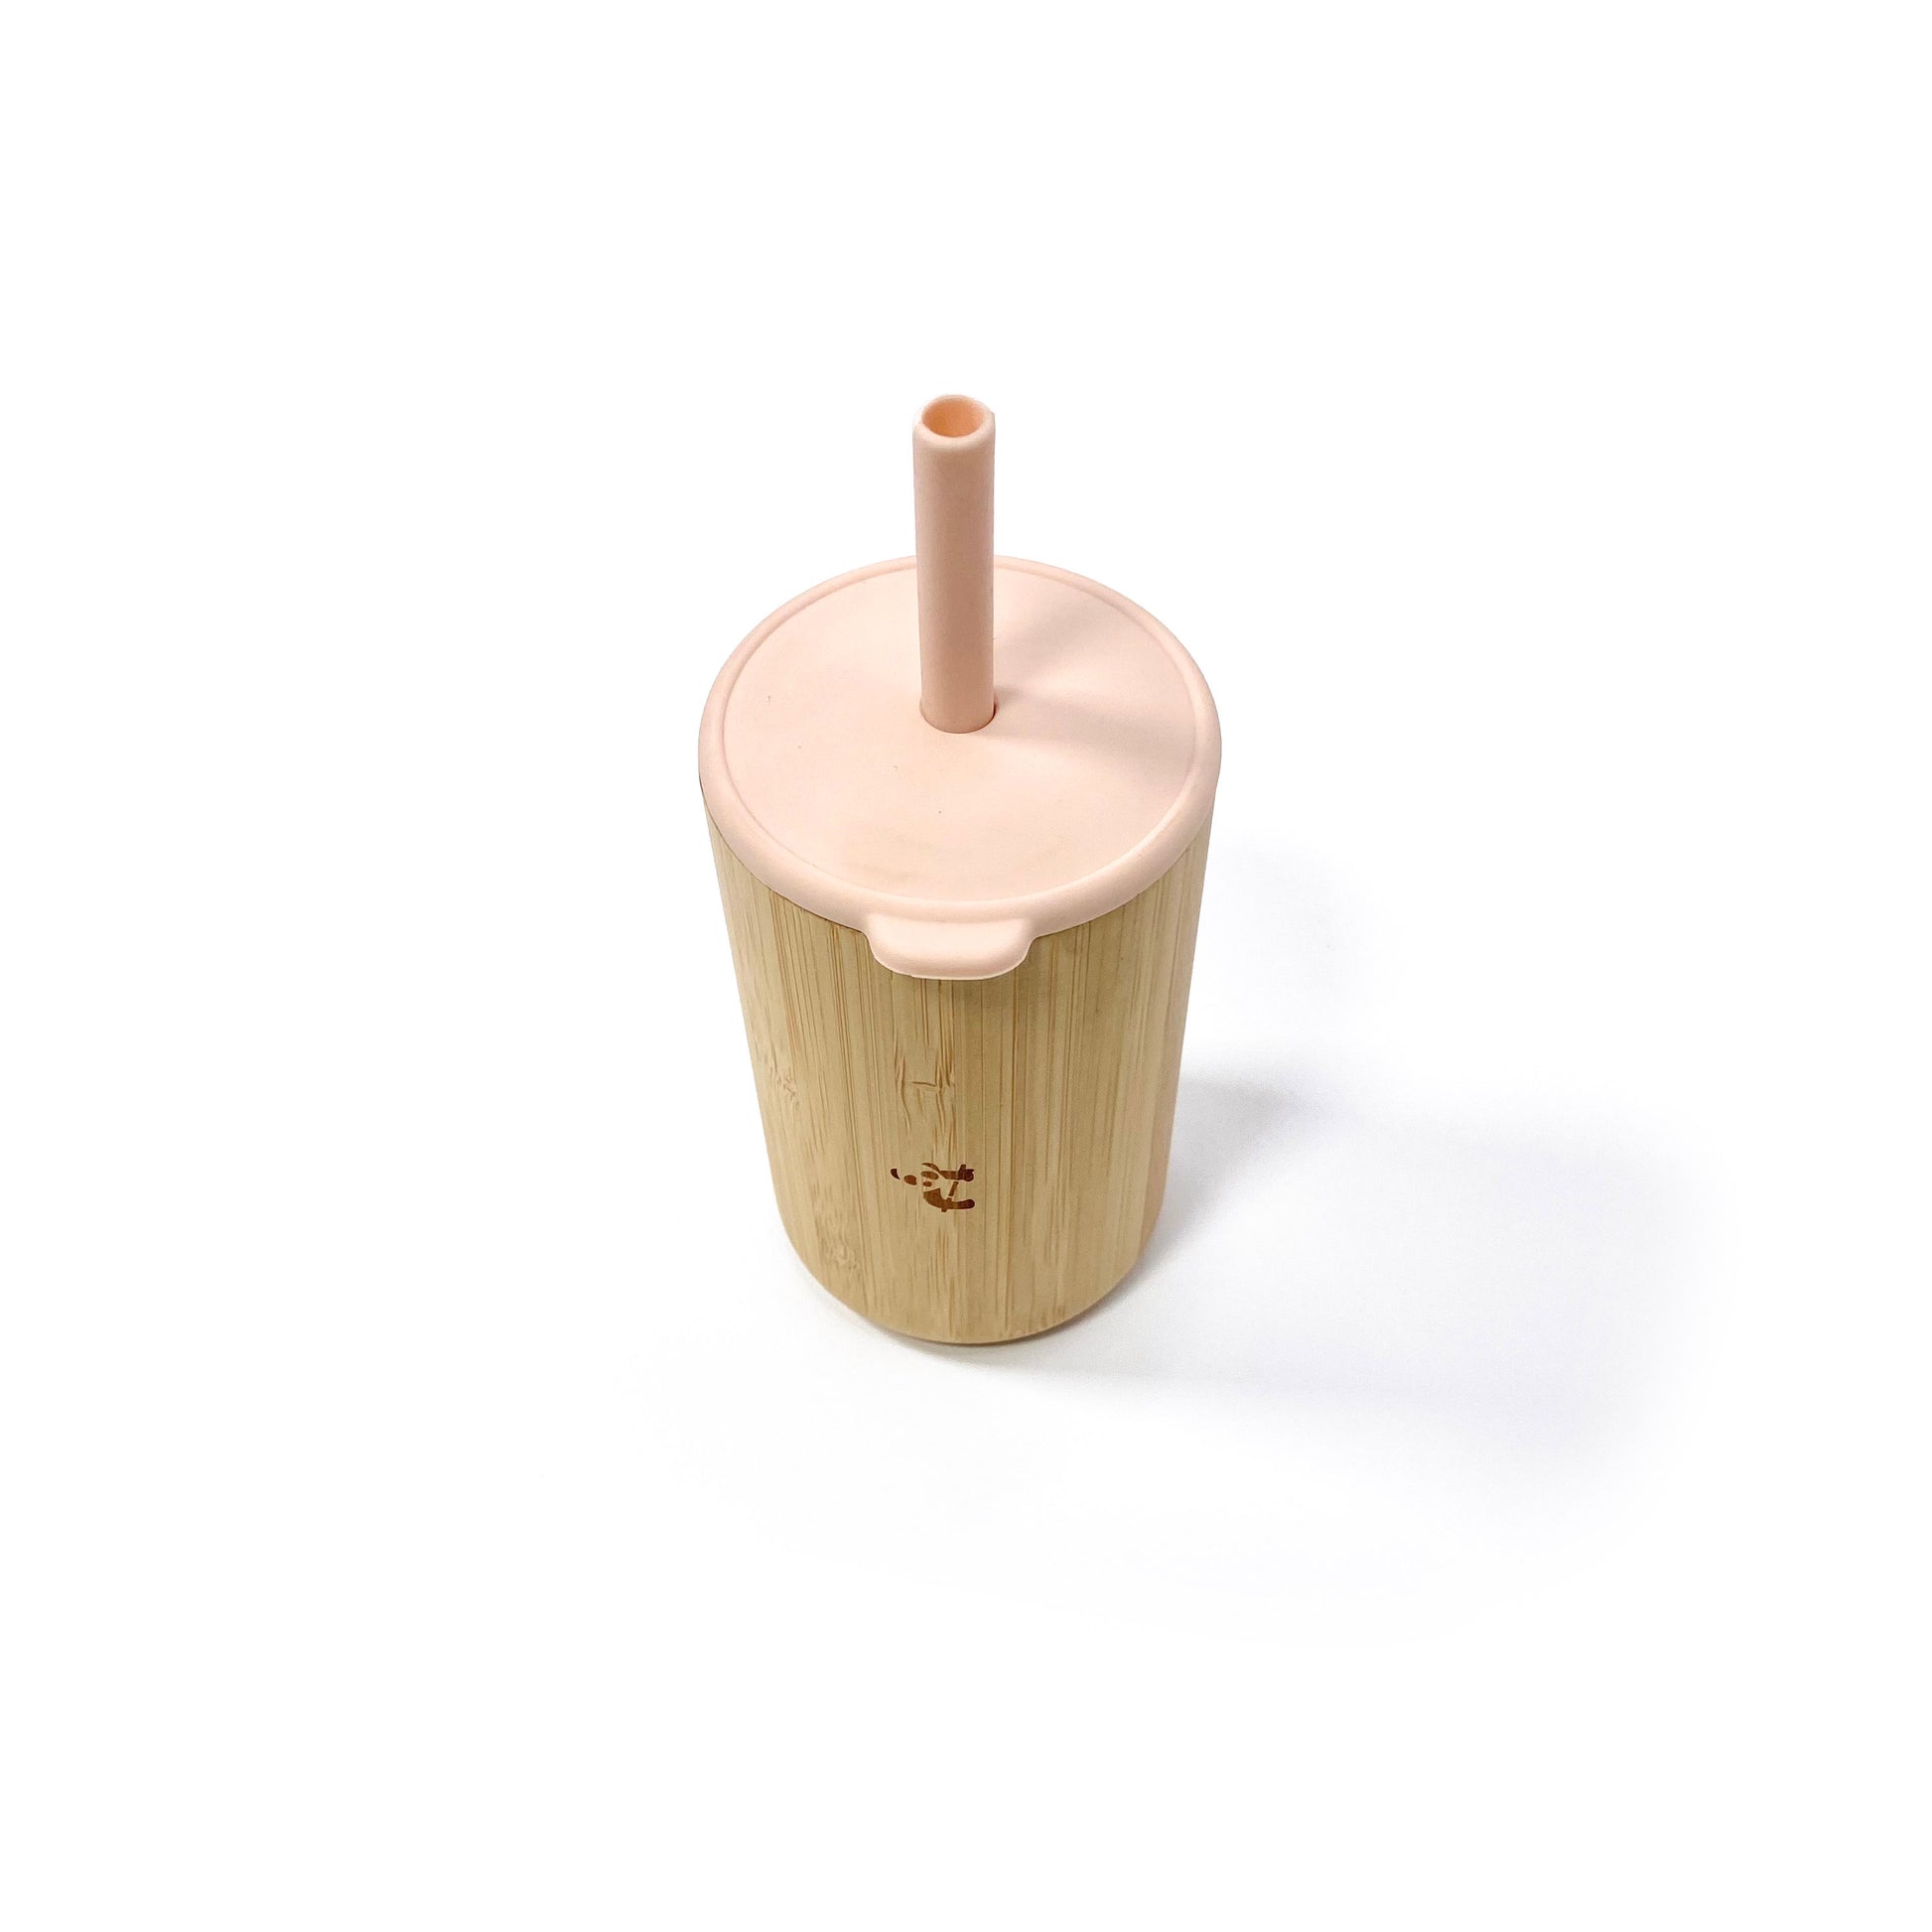 A children’s bamboo drinking cup, with a peachy pink silicone lid and matching straw. View shows the cup with lid and straw attached.